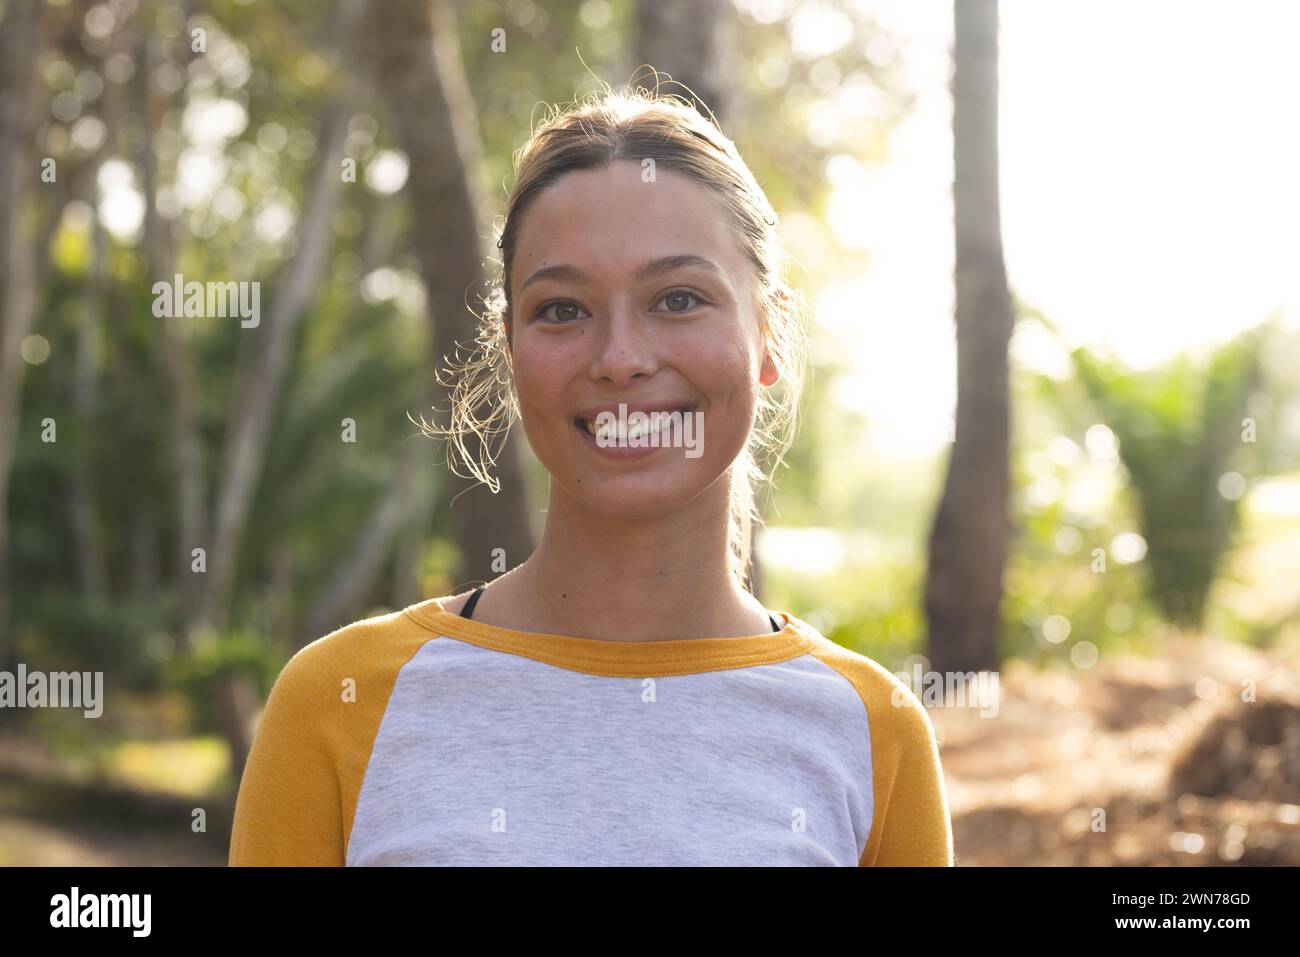 Young Caucasian woman smiles brightly, standing outdoors on a hike Stock Photo